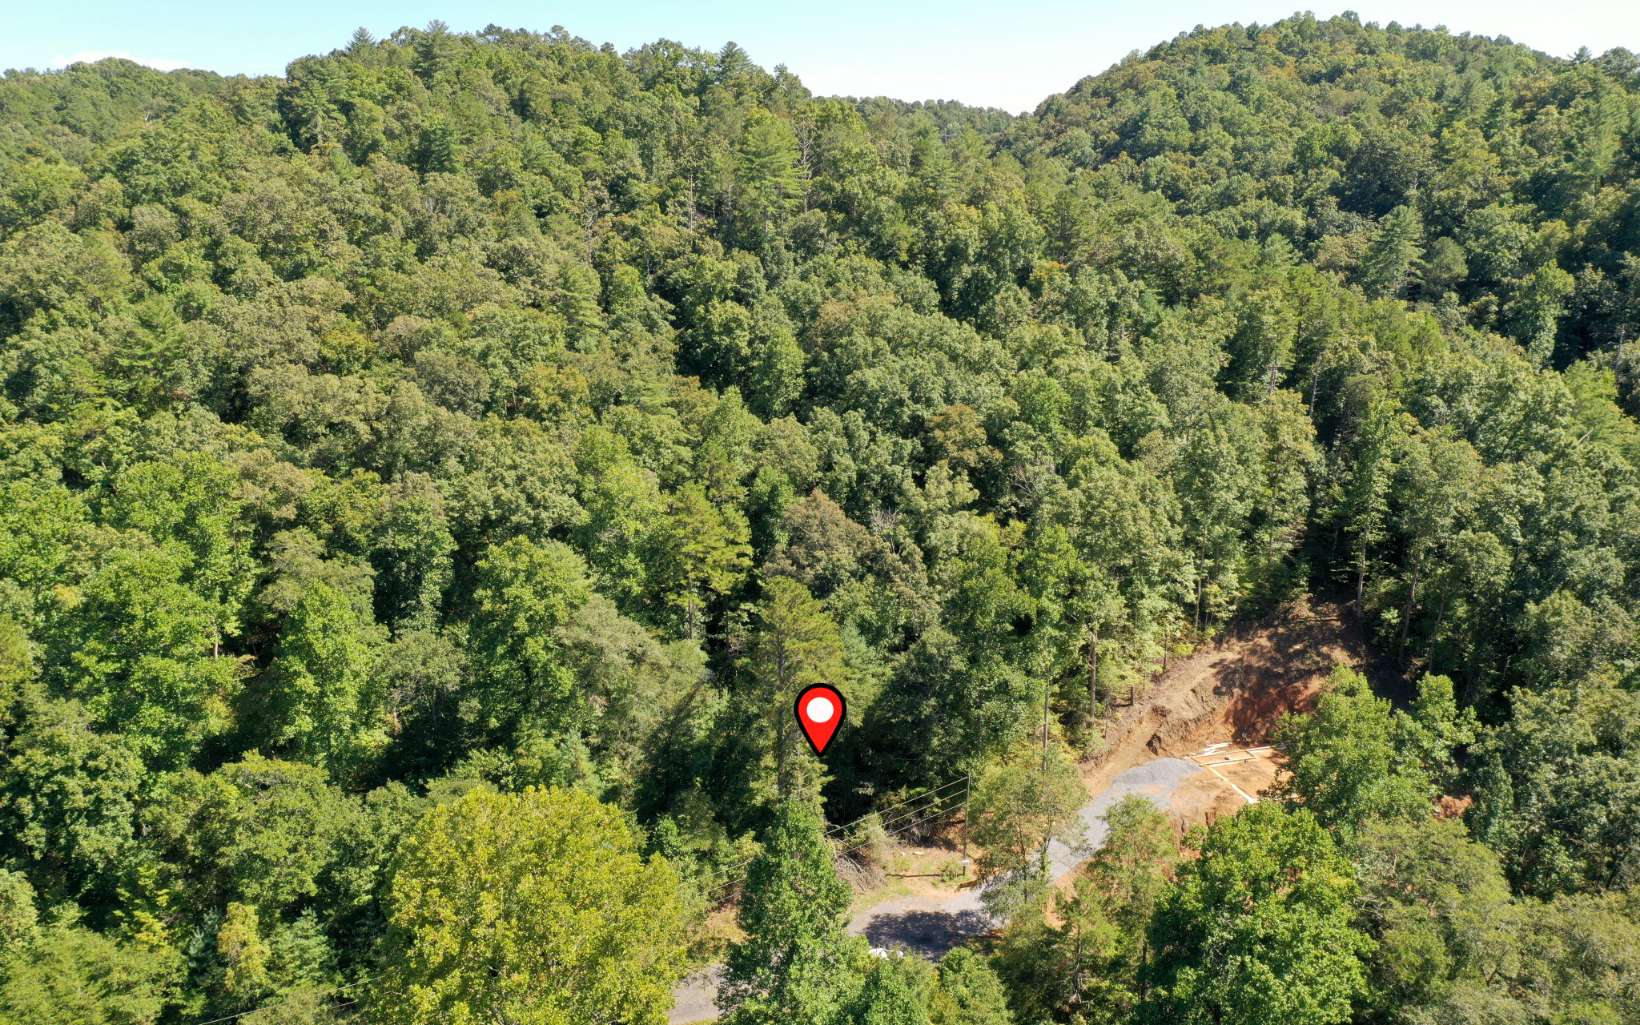 Enjoy the wonders of the North Georgia Mountains and build your dream mountain home in the gated Talking Rock Creek Resort! This 3.88-acre lot is less than 500 feet from Talking Rock Creek and would be perfect for a cabin with a large deck to enjoy the gorgeous mountains and listen to the sounds of the creek. This community is just an hour from Atlanta and offers fantastic amenities such as 2 pools, tennis, a fitness center, hiking, foraging, fishing, wildlife watching, and more. Spend the day out on Carter's lake, enjoying the beach, boating, hiking the trails, or take a short drive to visit several local vineyards, orchards, tubing, and charming towns like Historic Downtown Ellijay, Blue Ridge, and McCaysville.